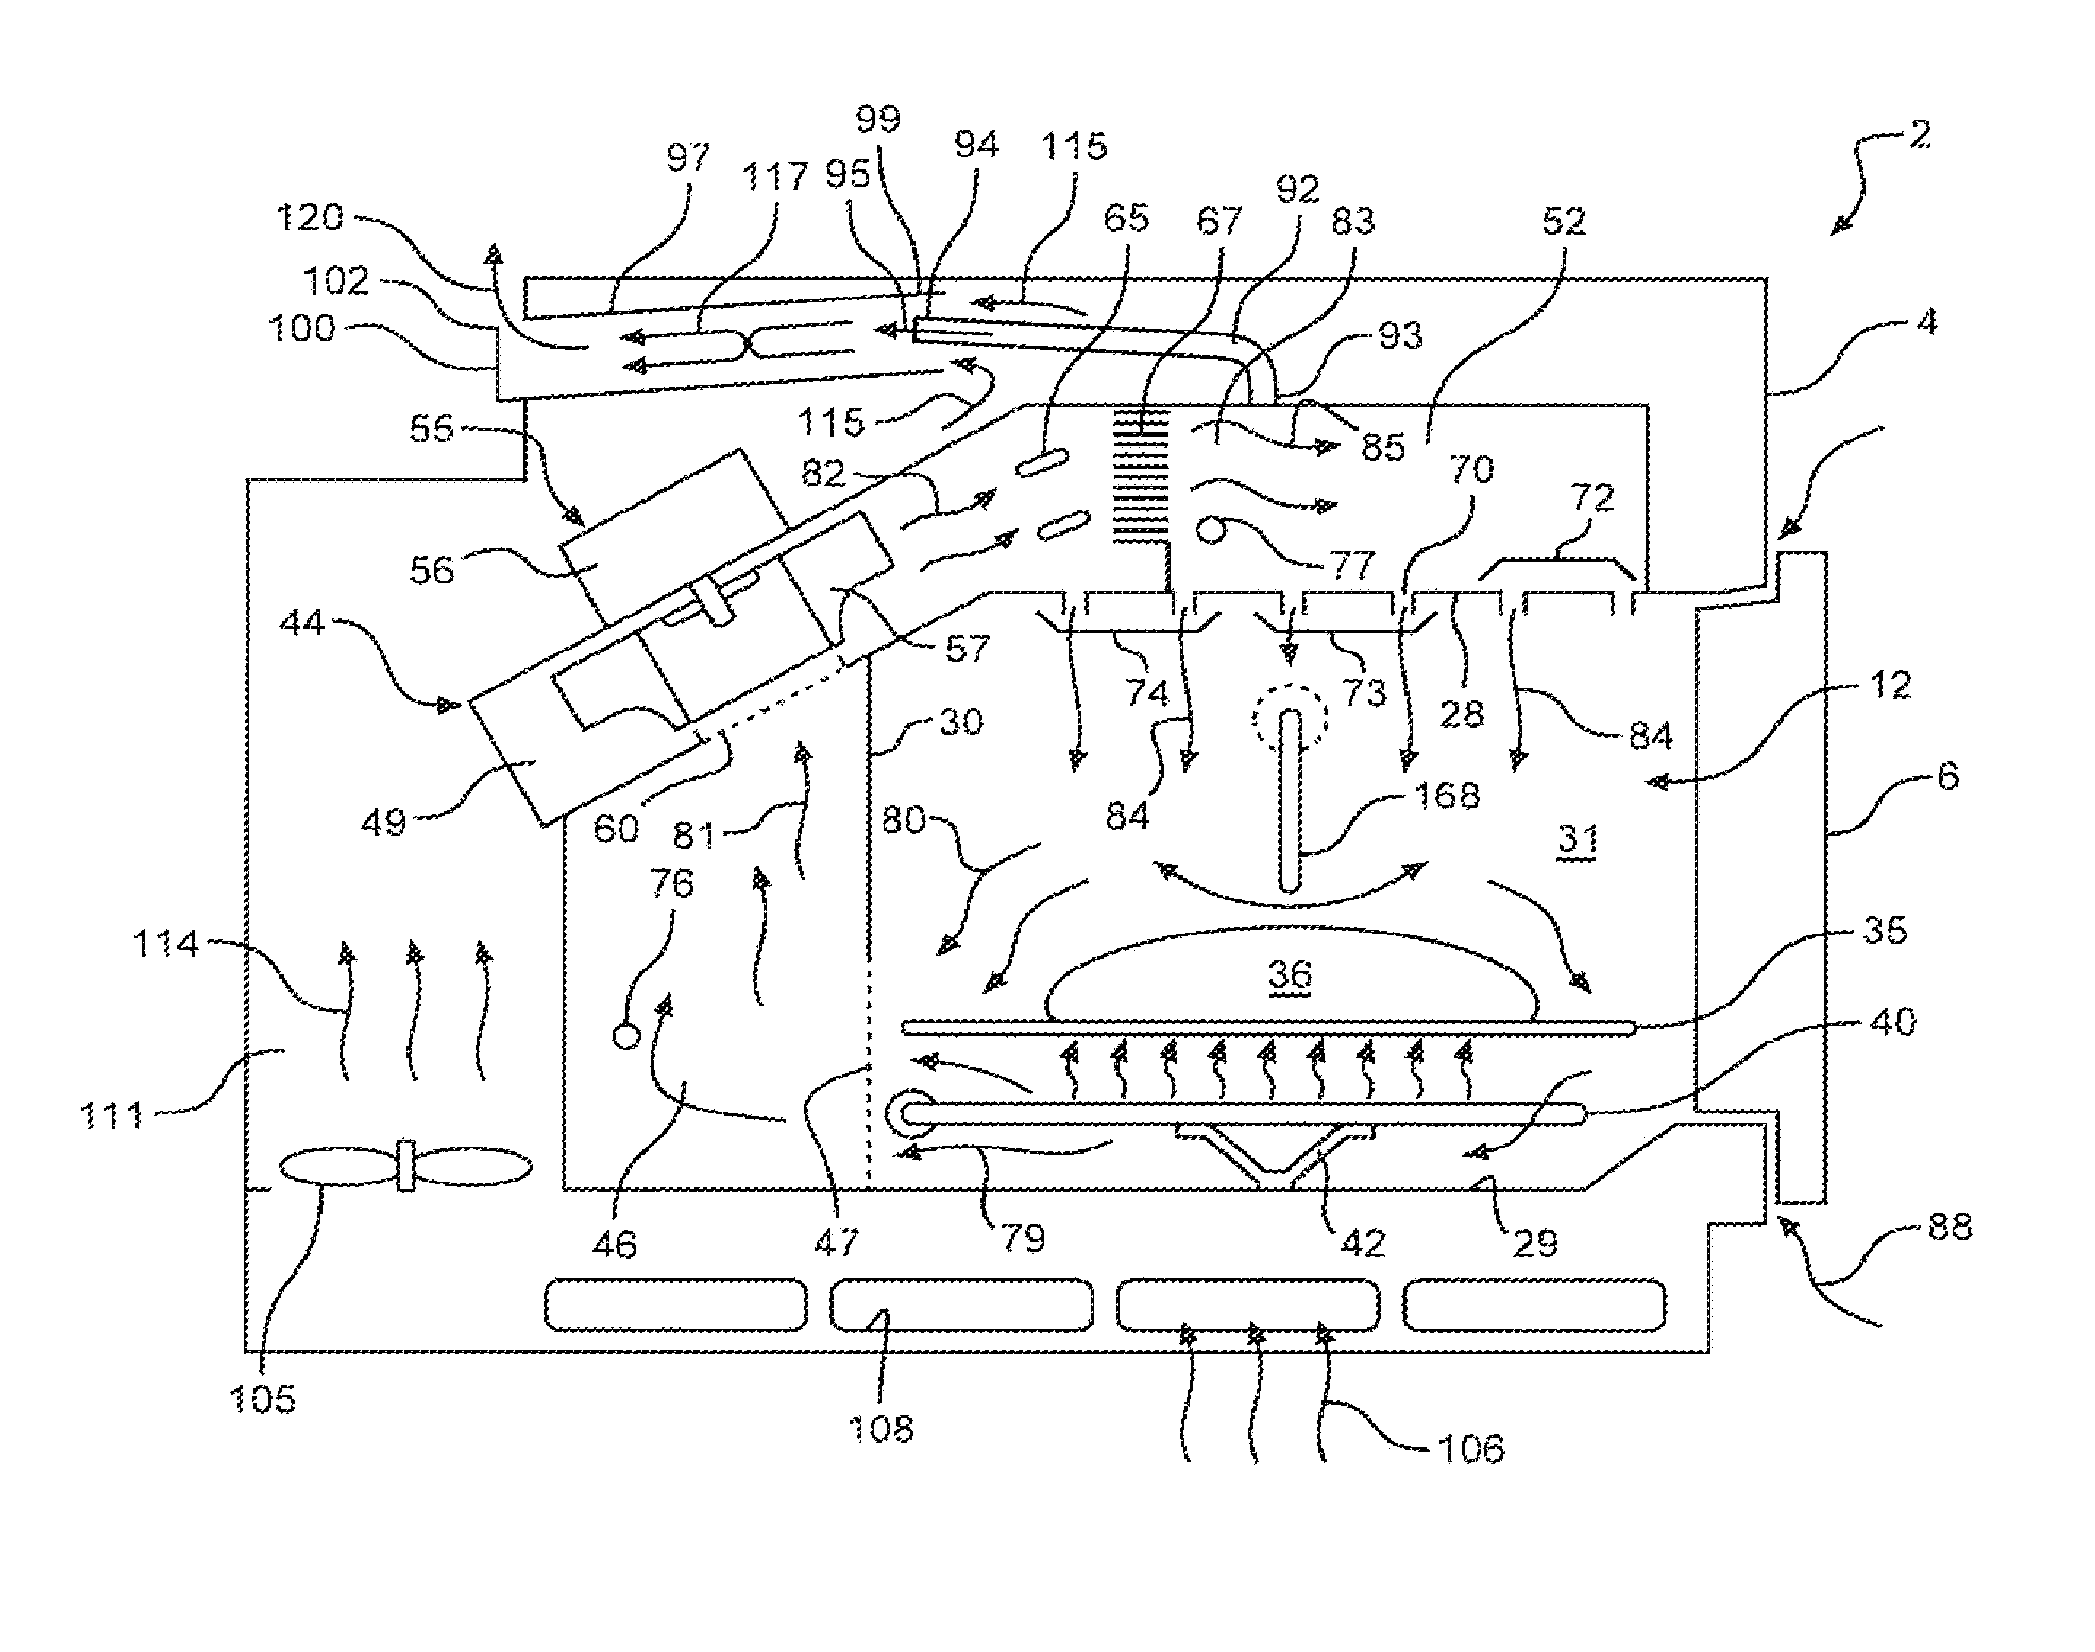 Air circuit for cooking appliance including combination heating system